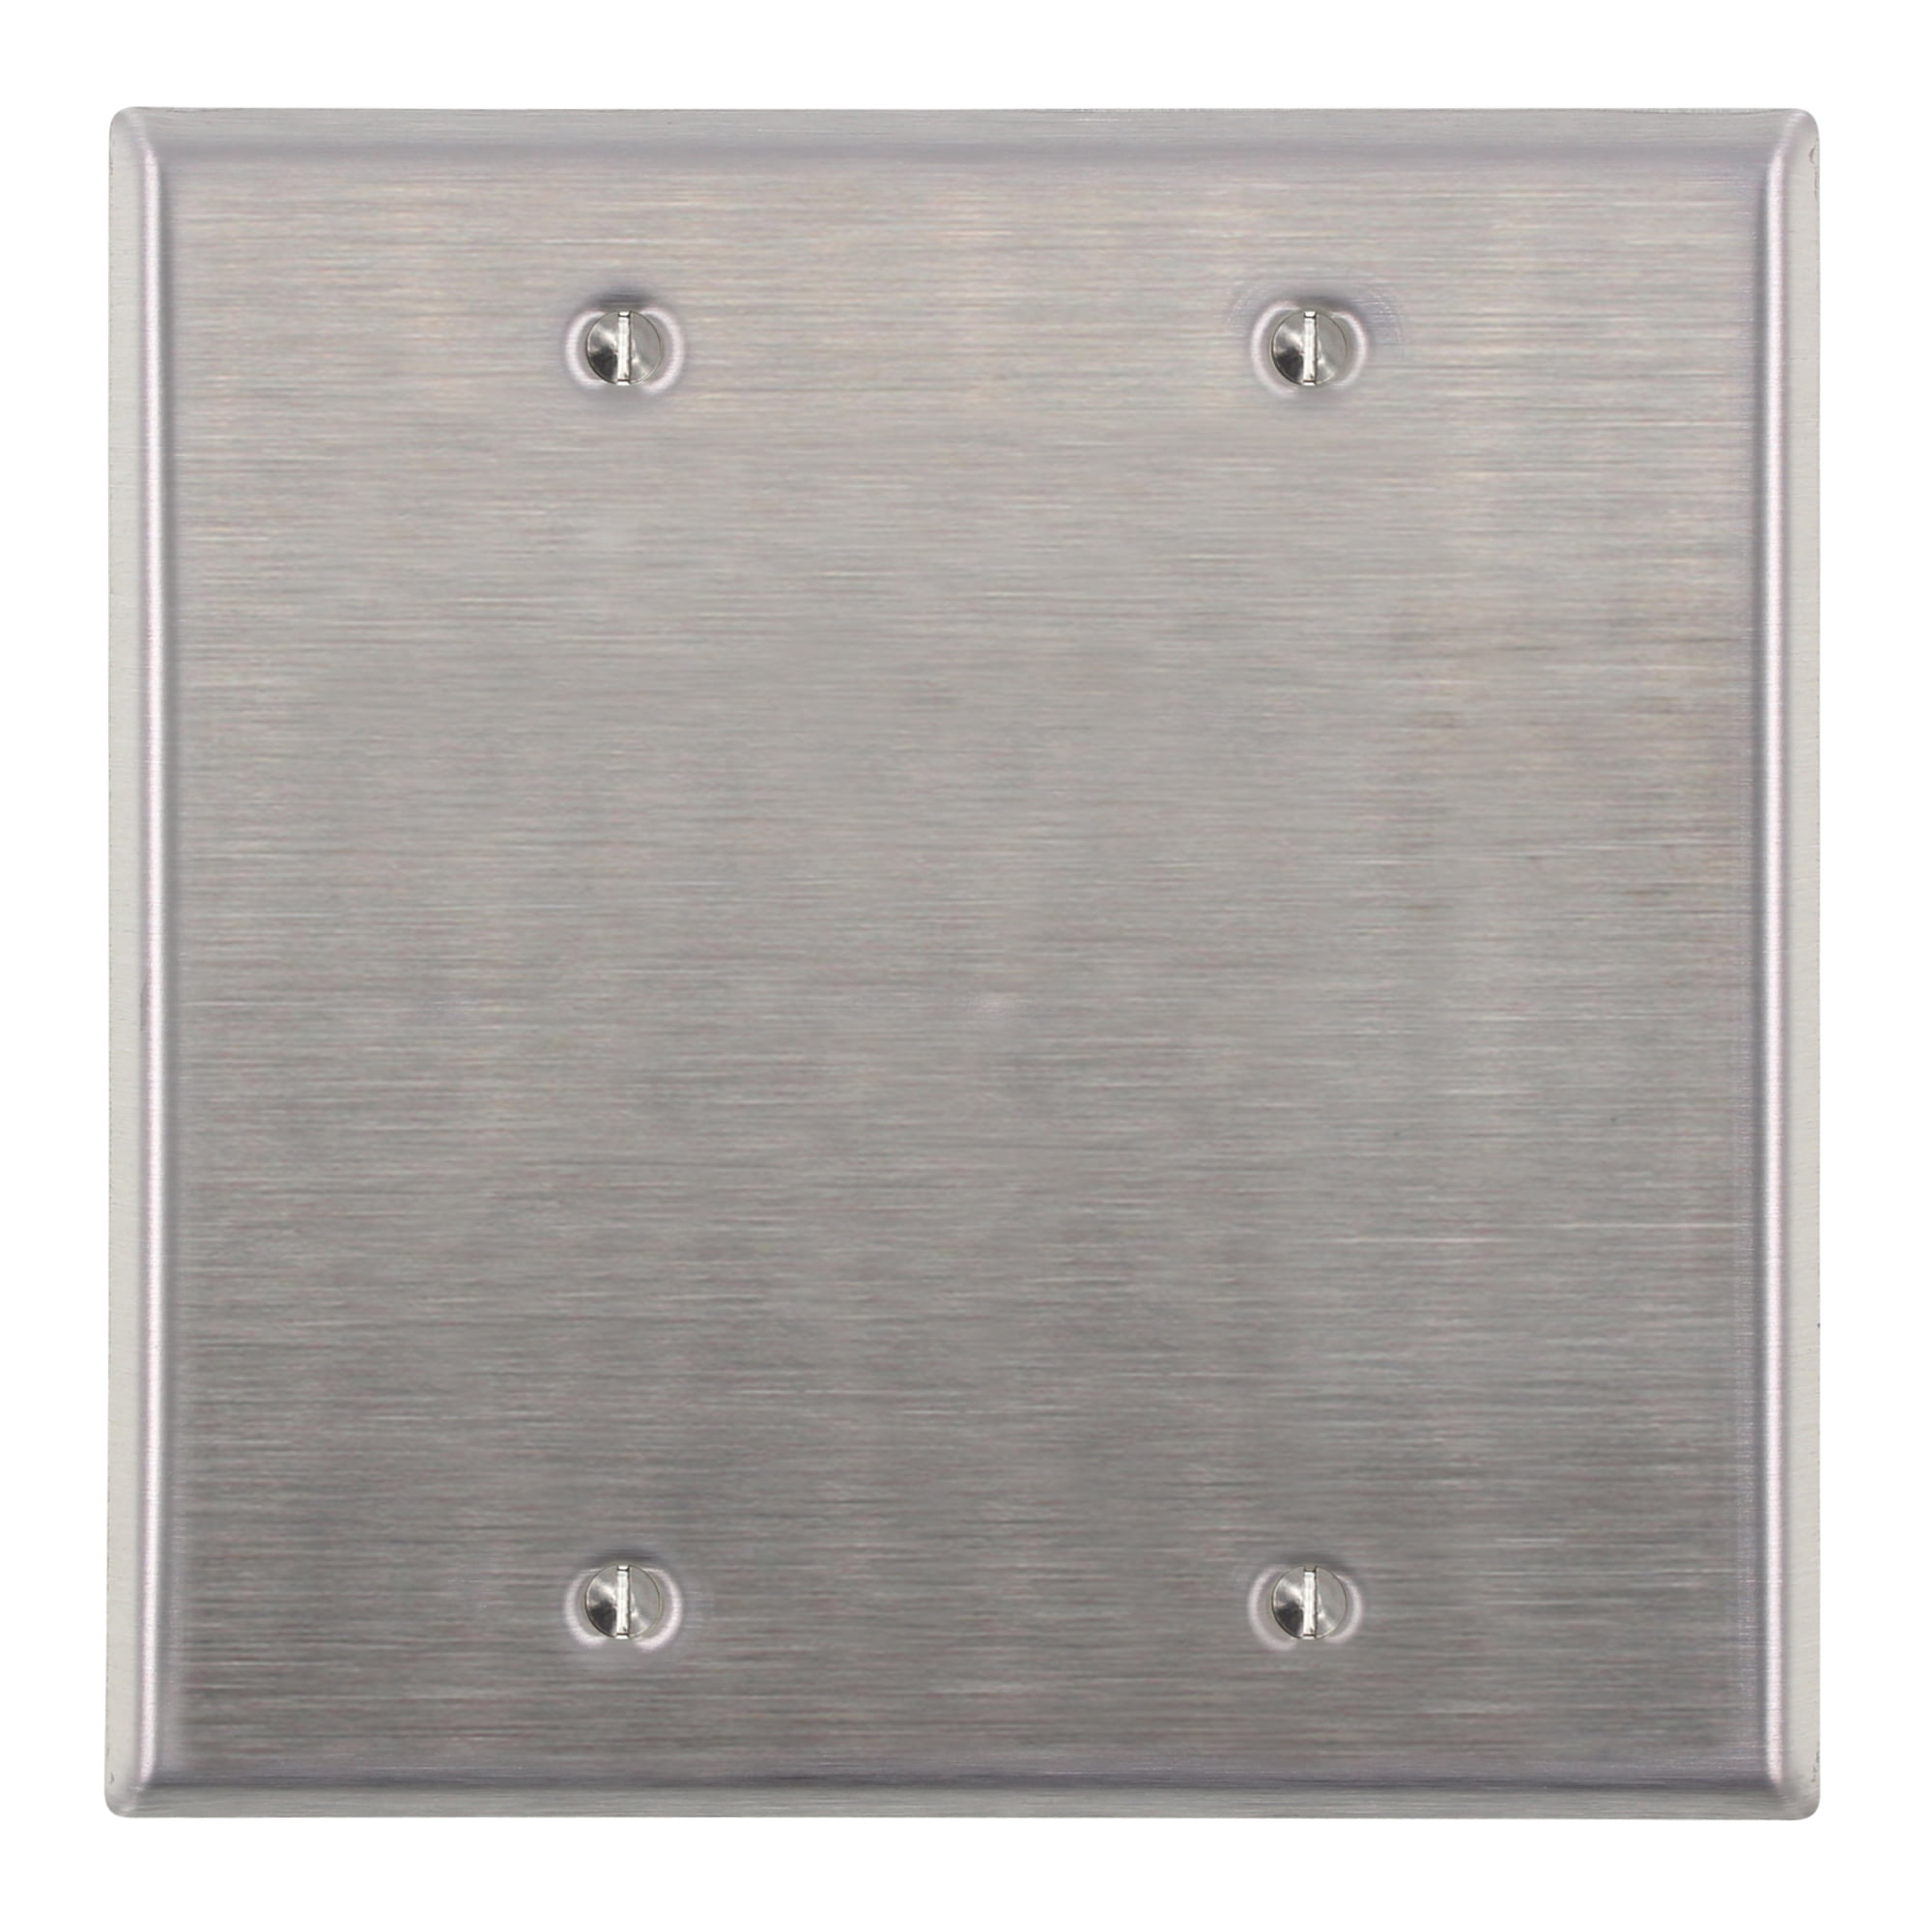 2-Gang No-Device BLANK Wallplate Standard Size Box Mount • Stainless Steel.